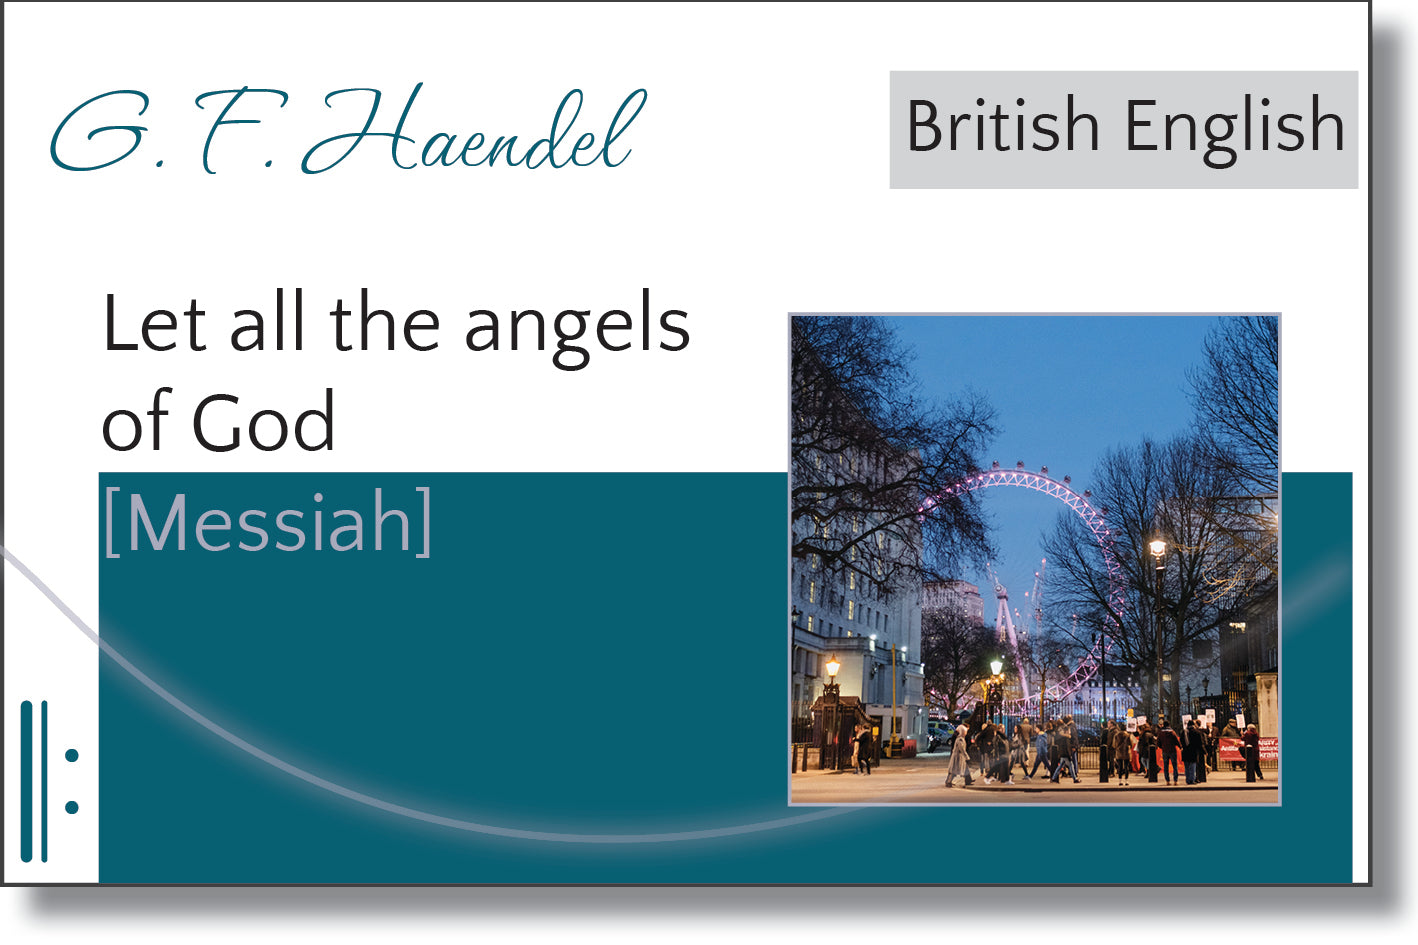 Messiah - Let all the angels of God